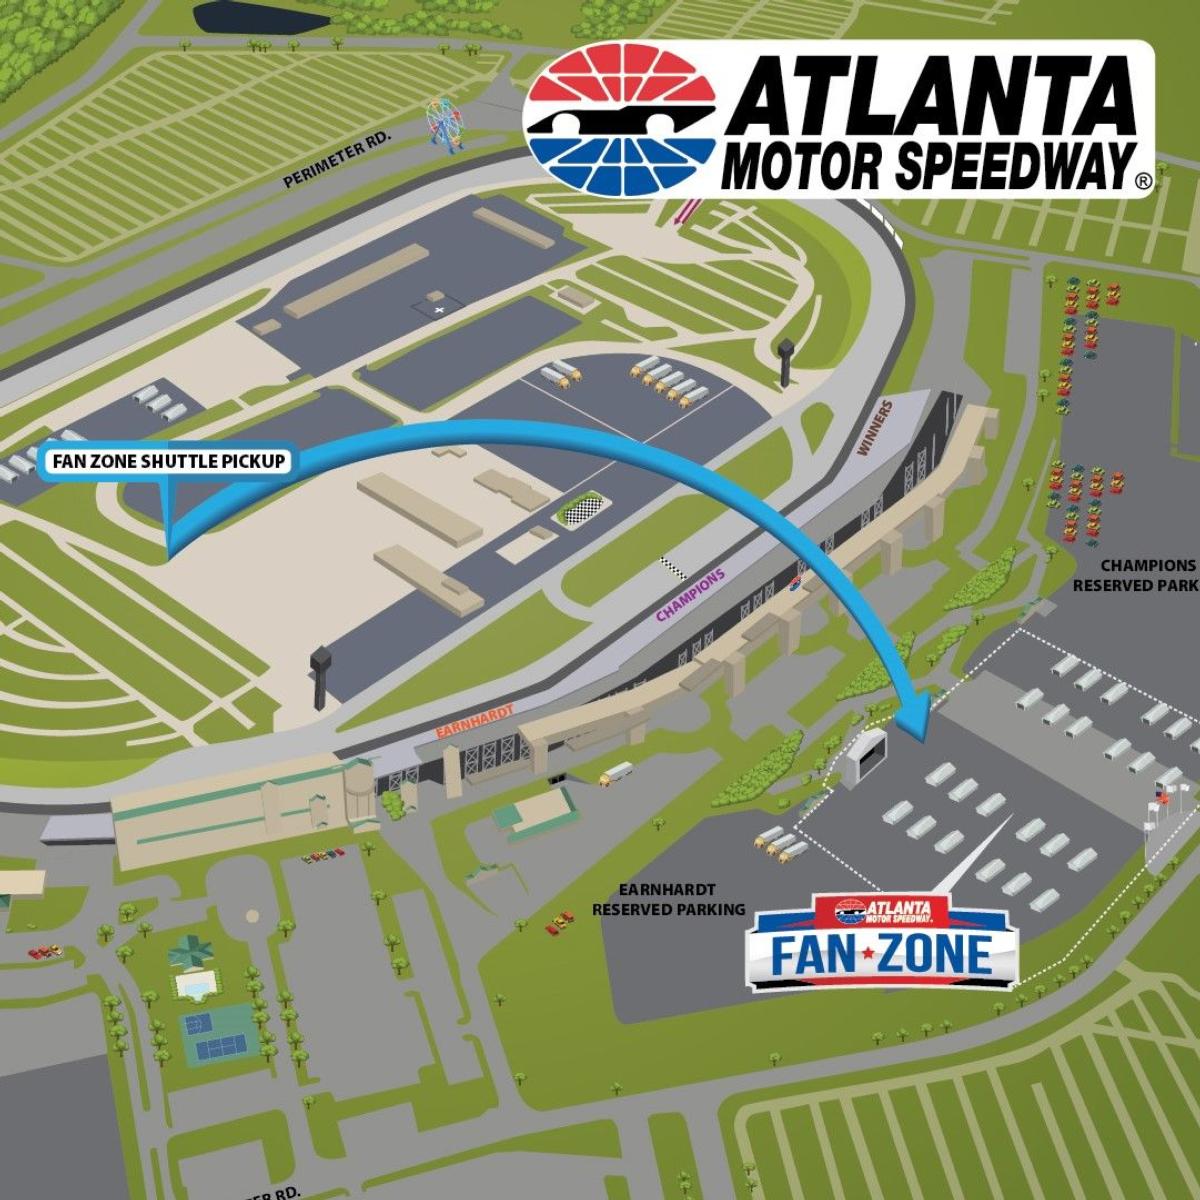 New express shuttle added between infield and fan zone for NASCAR